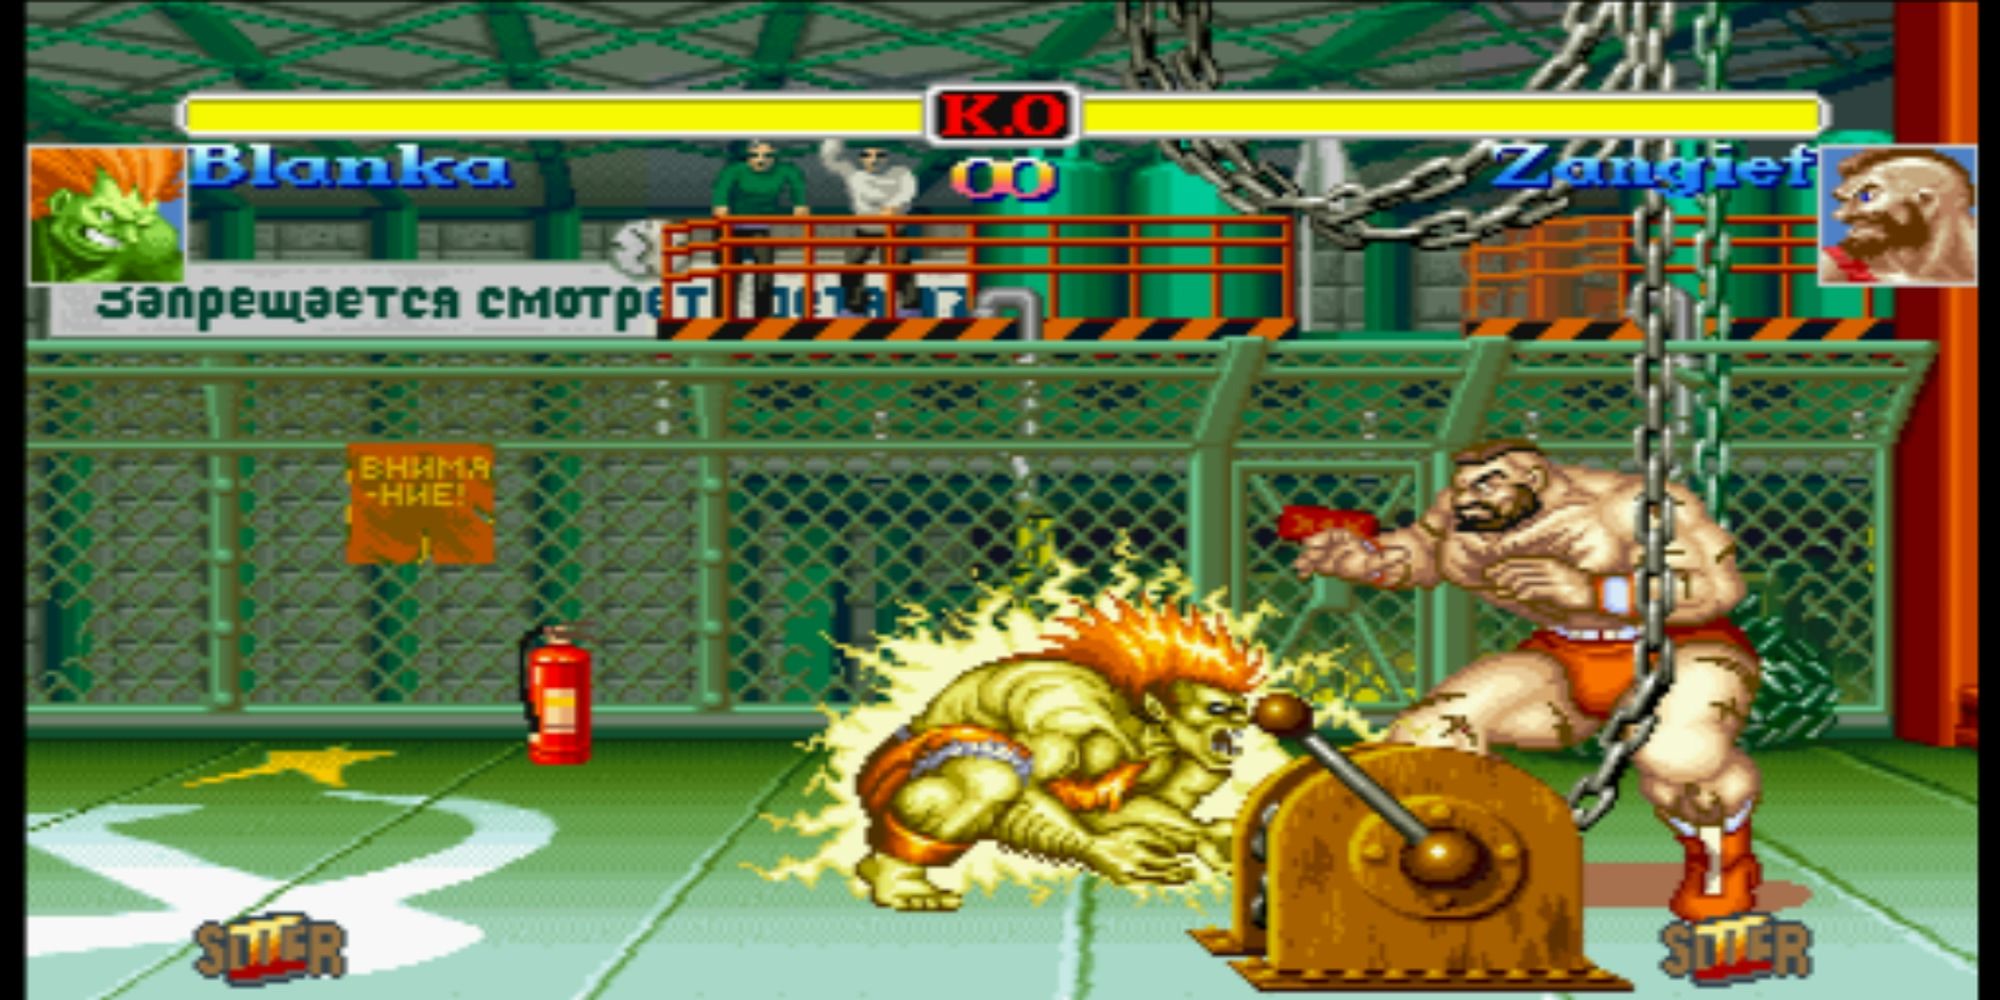 Super SF2 Blanka creates Electric Thunder in a Russian factory in Hyper Street Fighter 2.